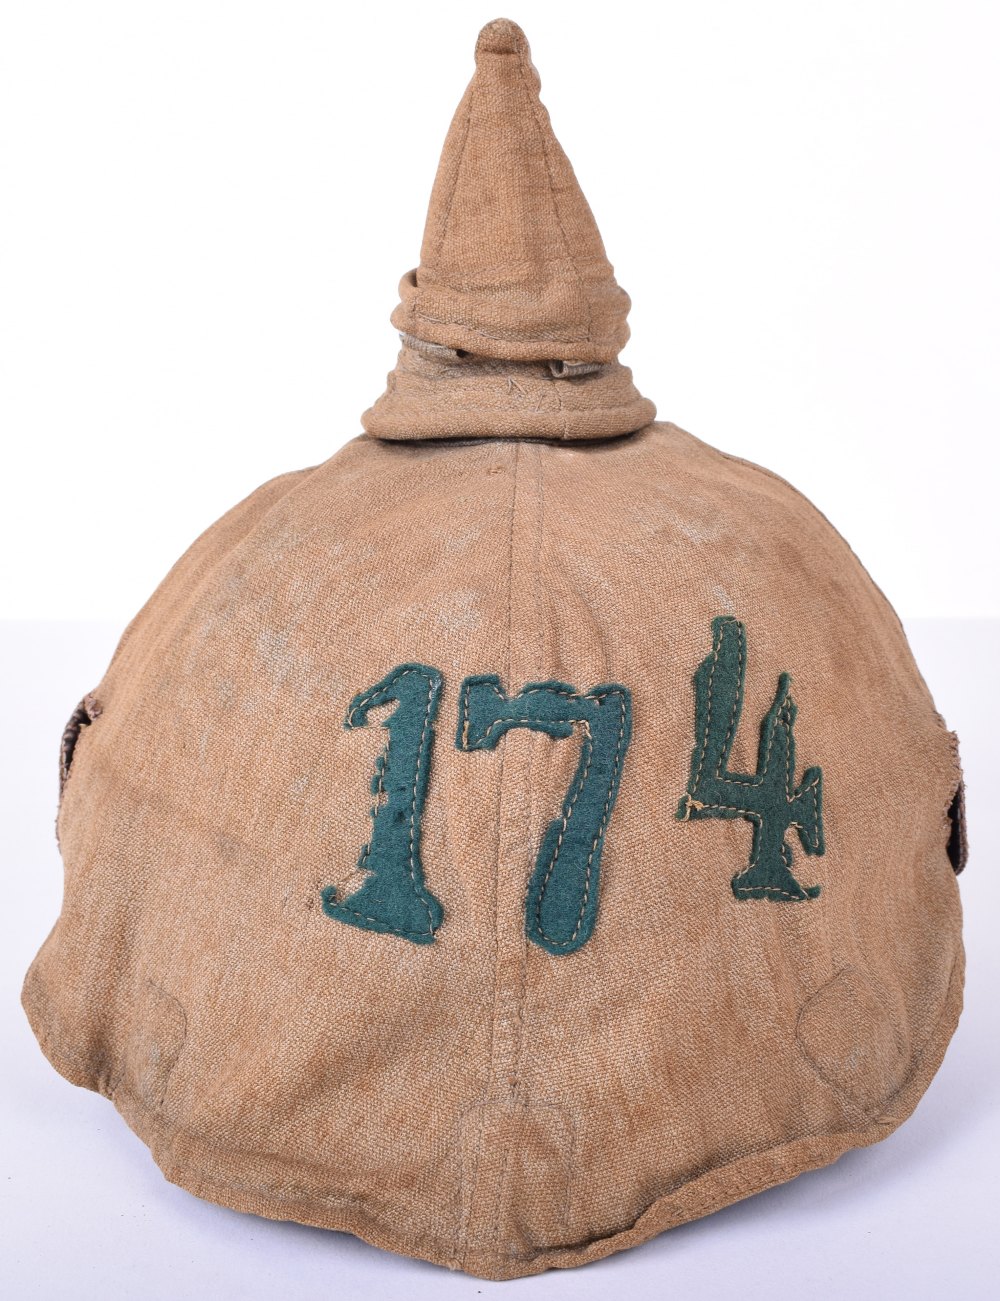 Prussian Other Ranks Pickelhaube with Original Trench Cover - Image 3 of 19